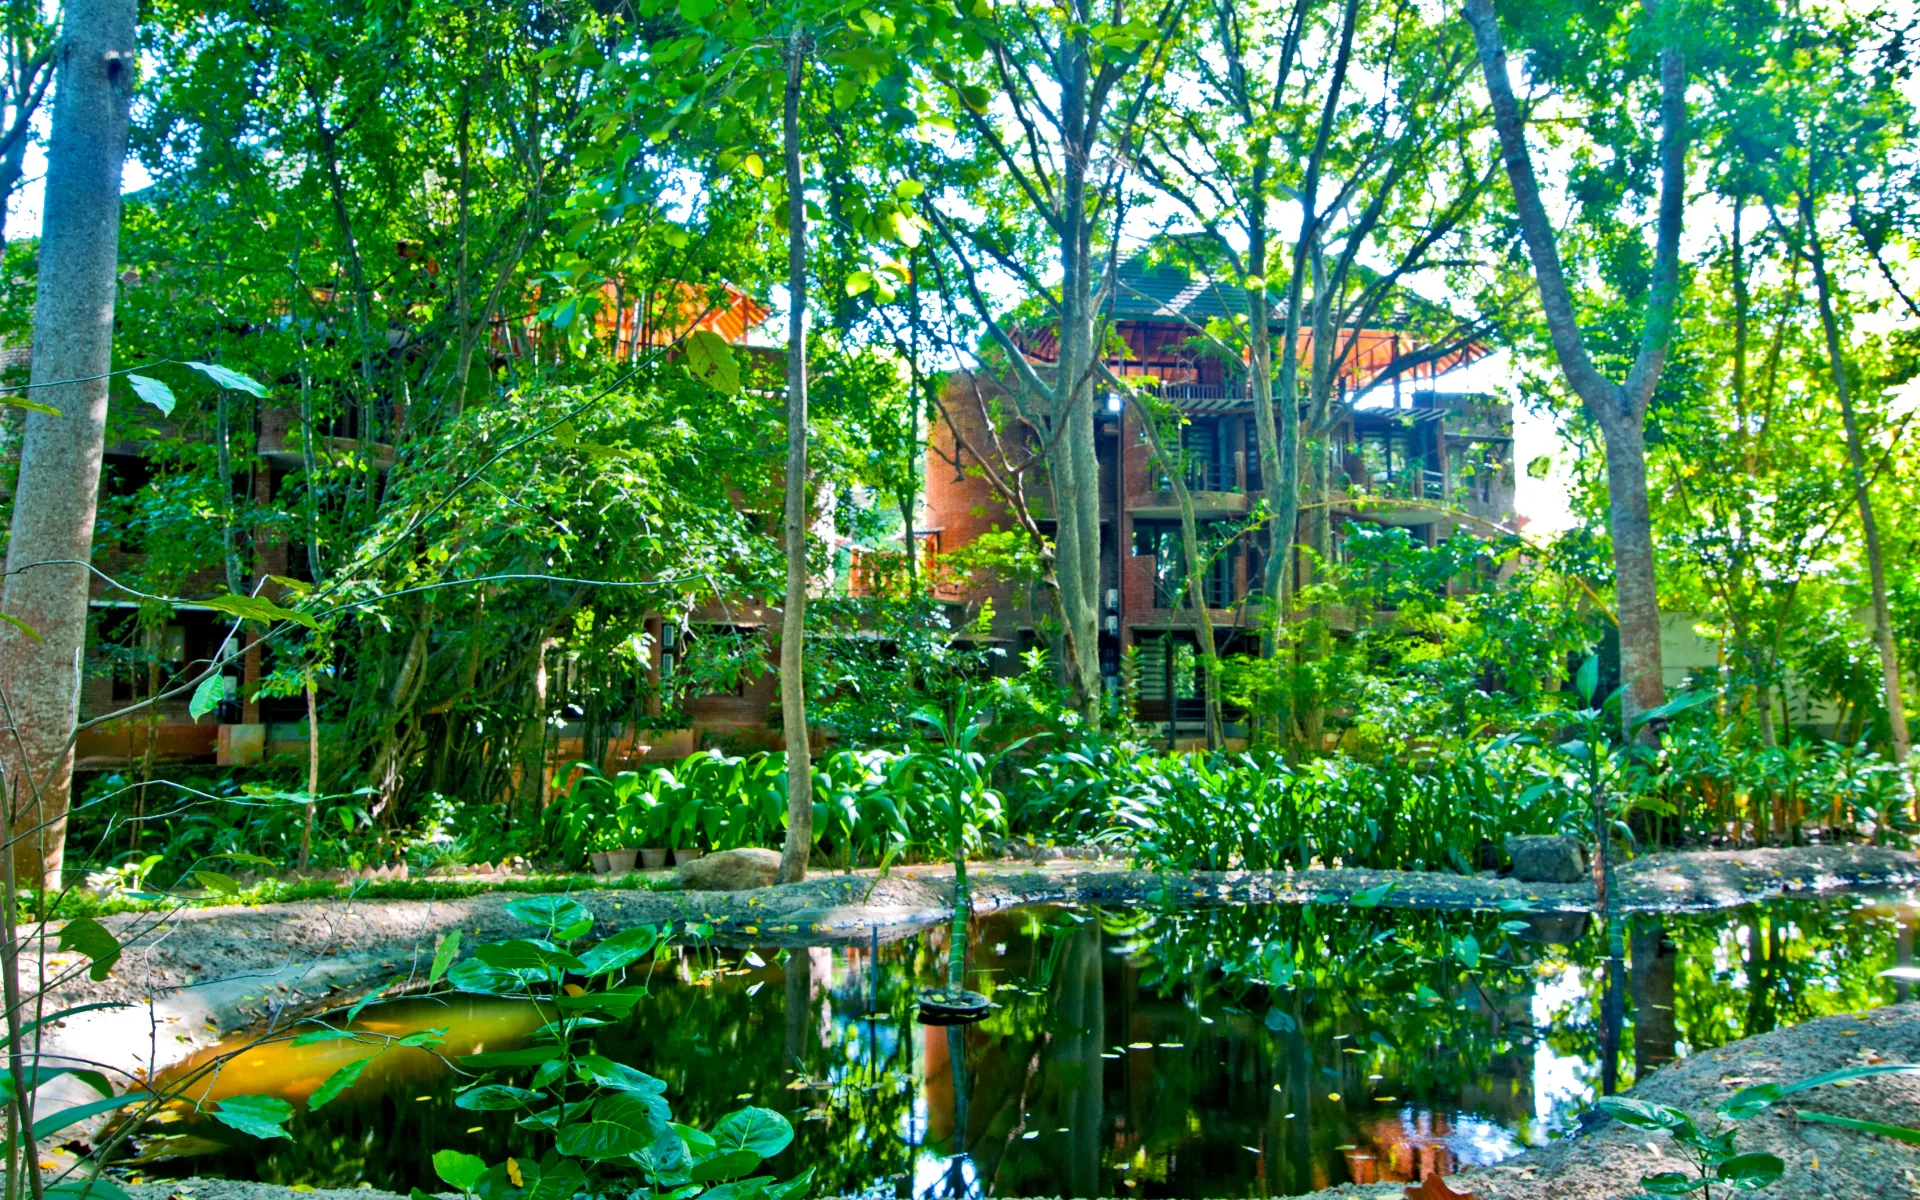 A pond is surrounded by tropical foliage, ahead of the main resort building.